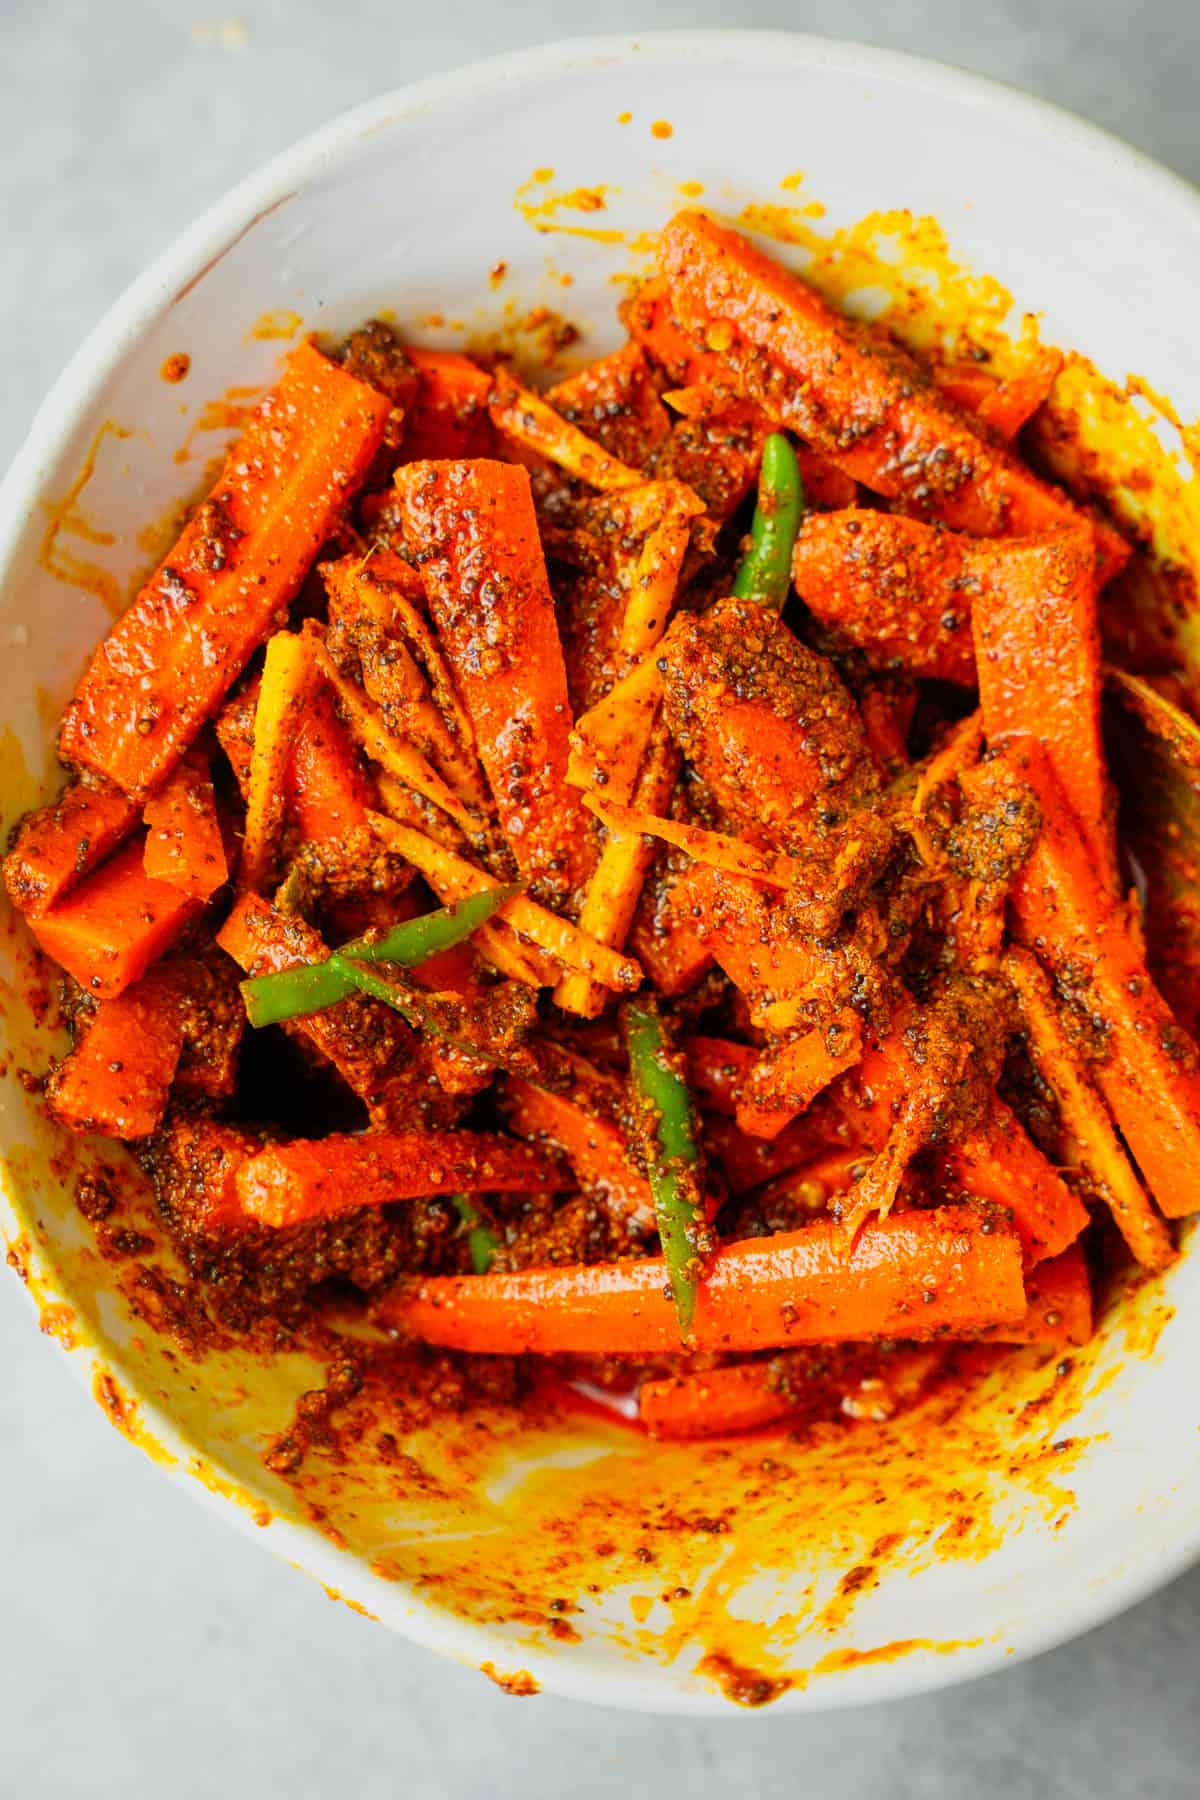 Carrot pickle is mixed in a white ceramic bowl.